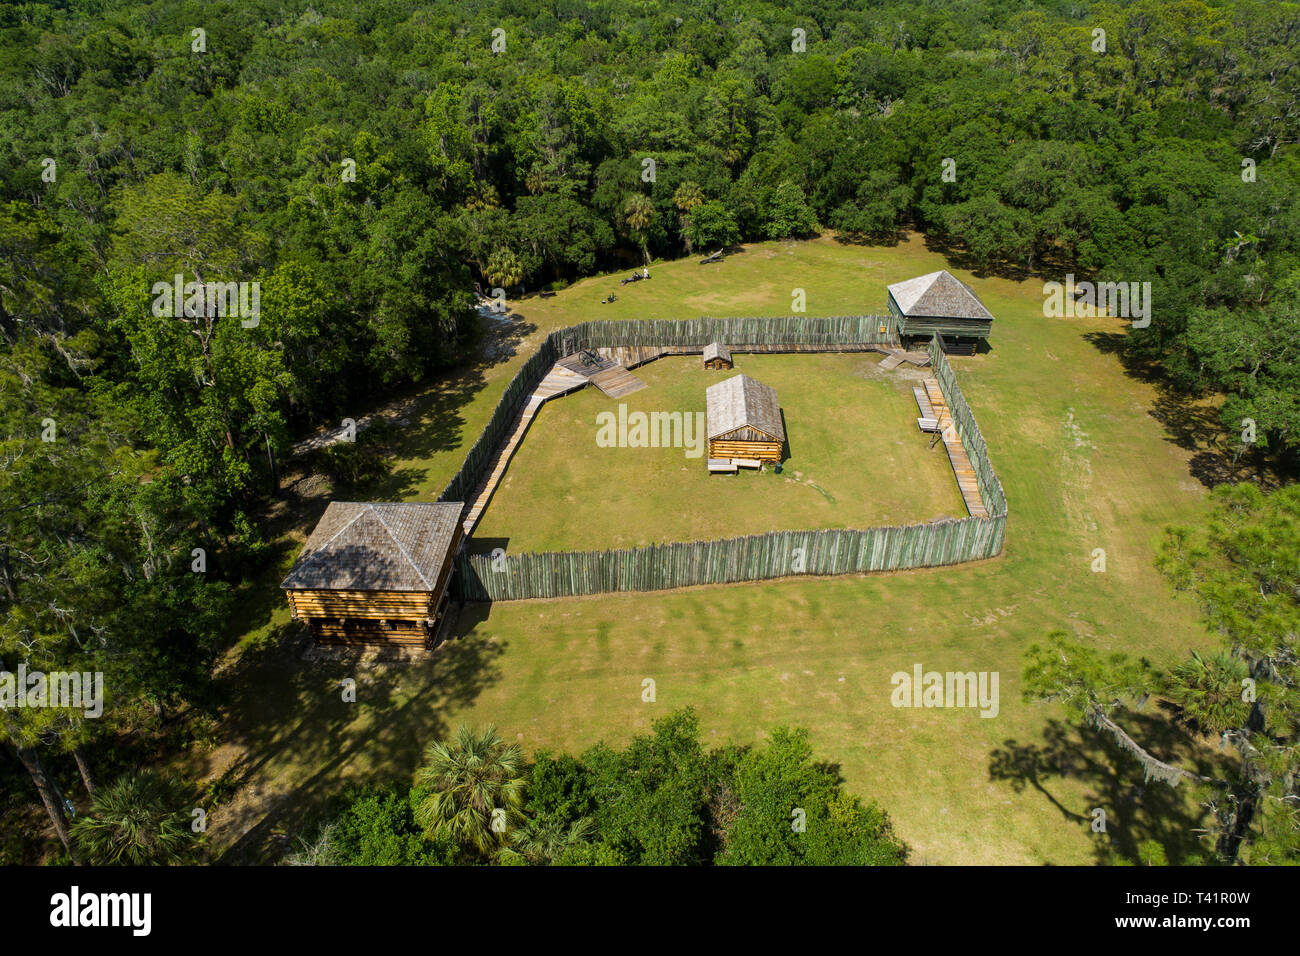 Fort Foster is a Second Seminole War era fort in central Florida, located 9 miles south of current-day Zephyrhills in Pasco County. Fort Foster was or Stock Photo